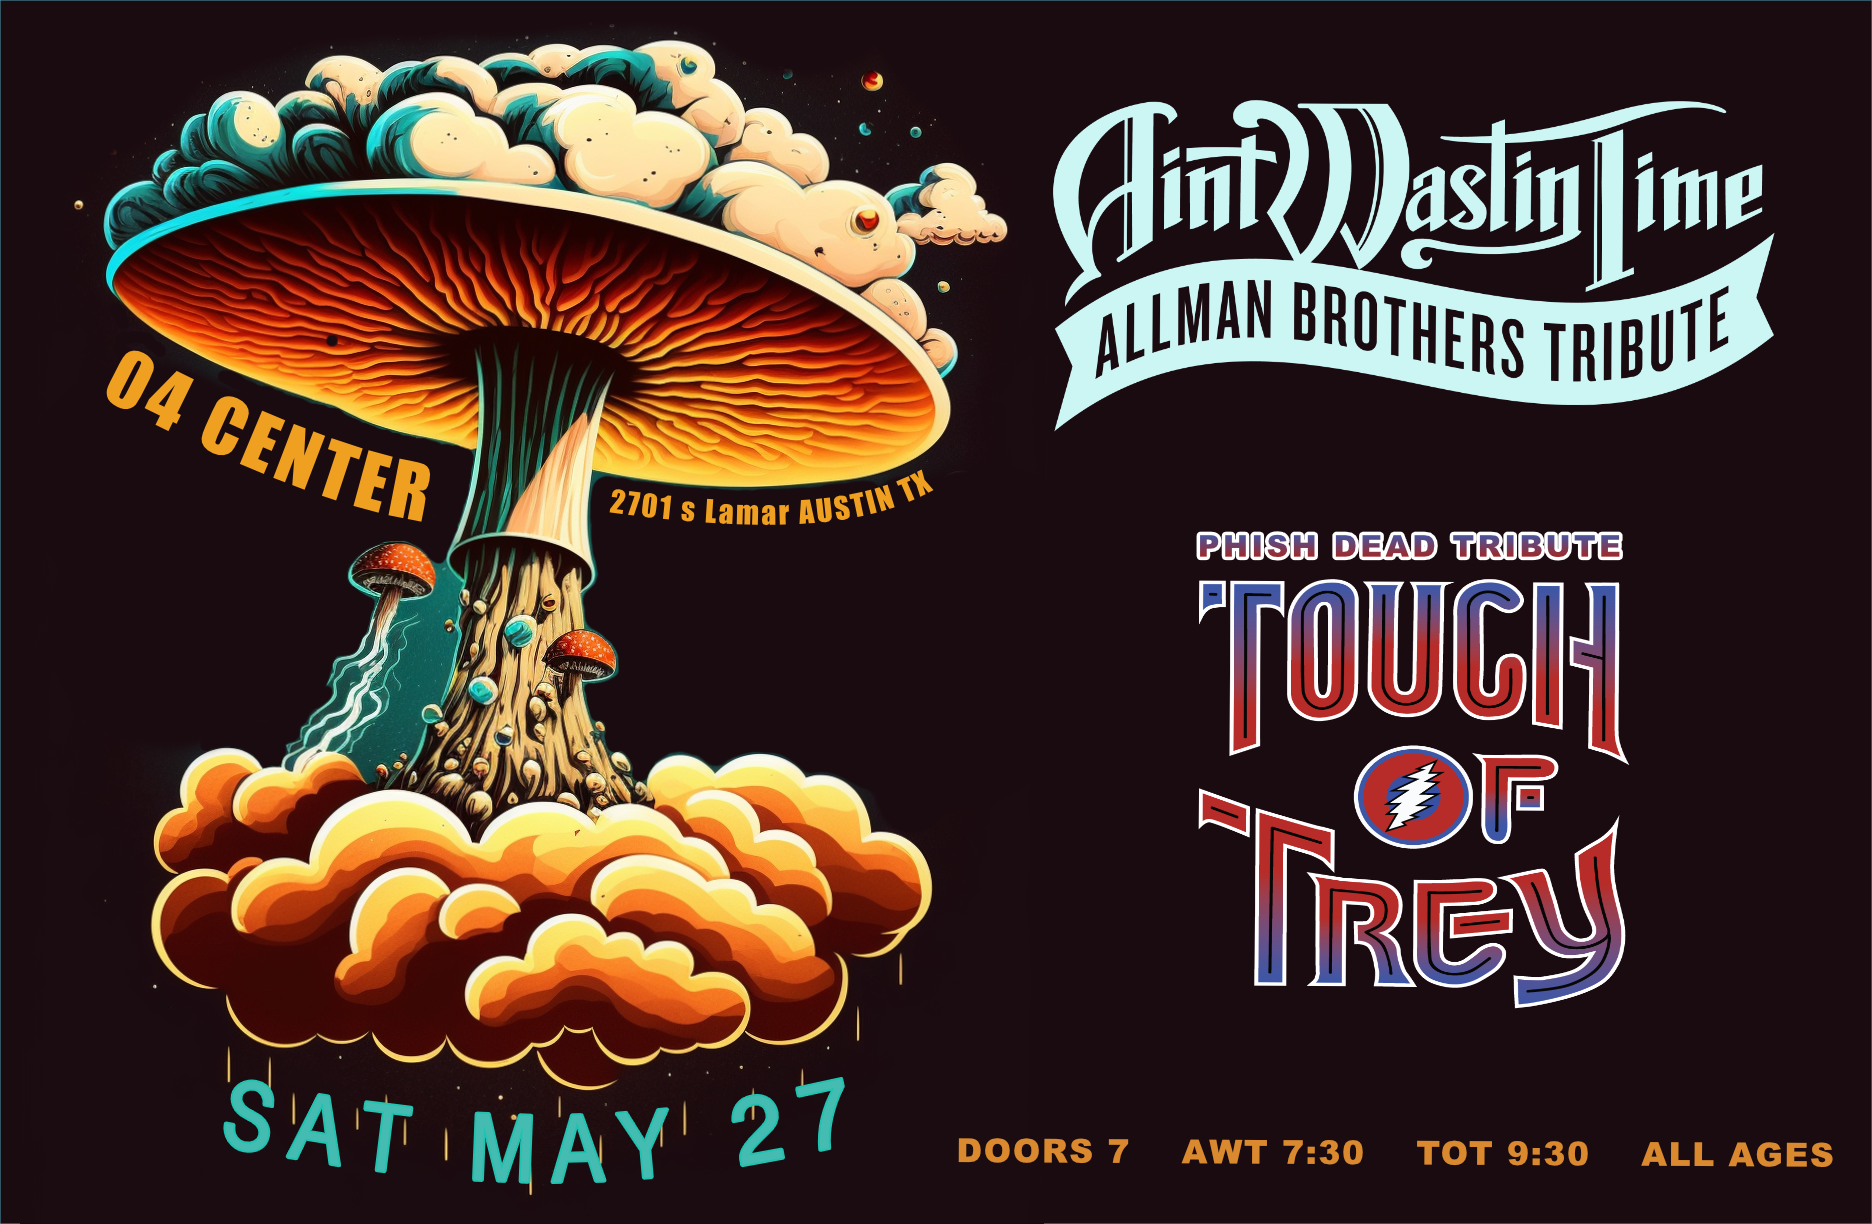 Touch of Trey & Ain't Wastin' Time in Austin at The 04 Center